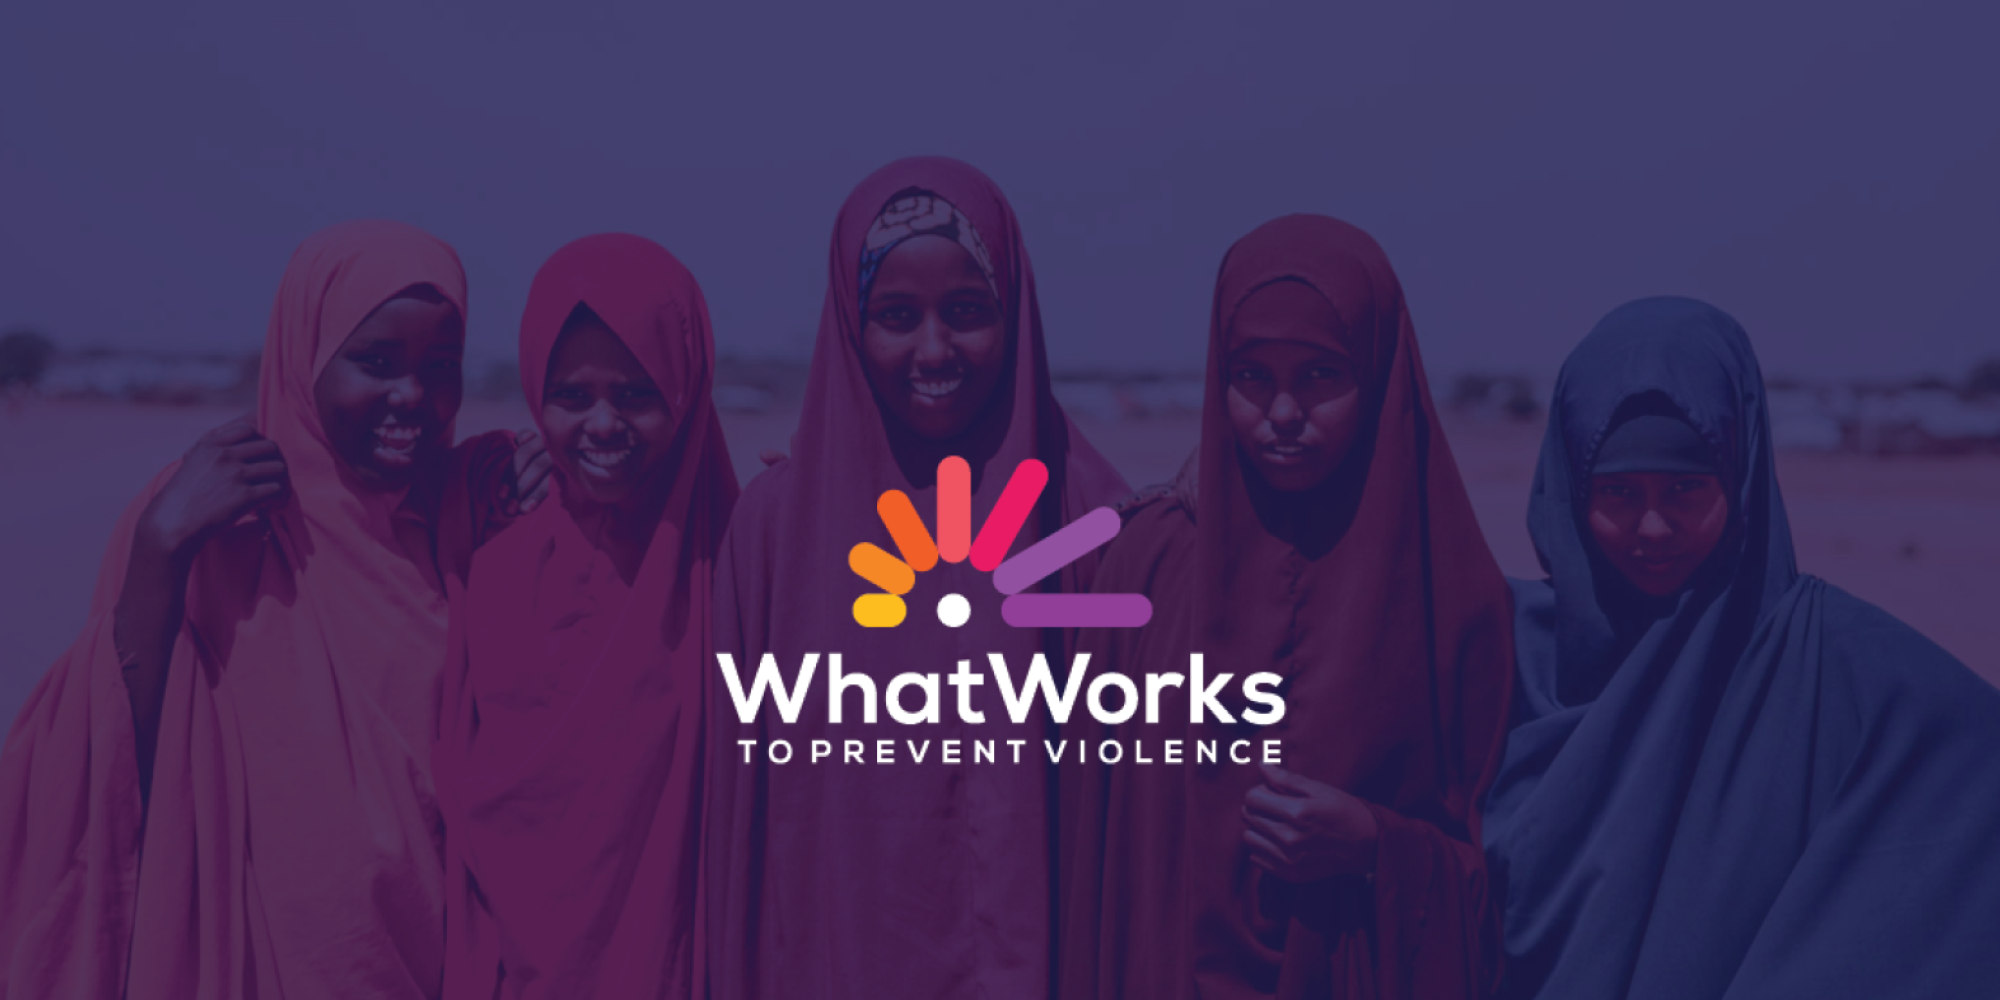 What Works to Prevent Violence project logo.